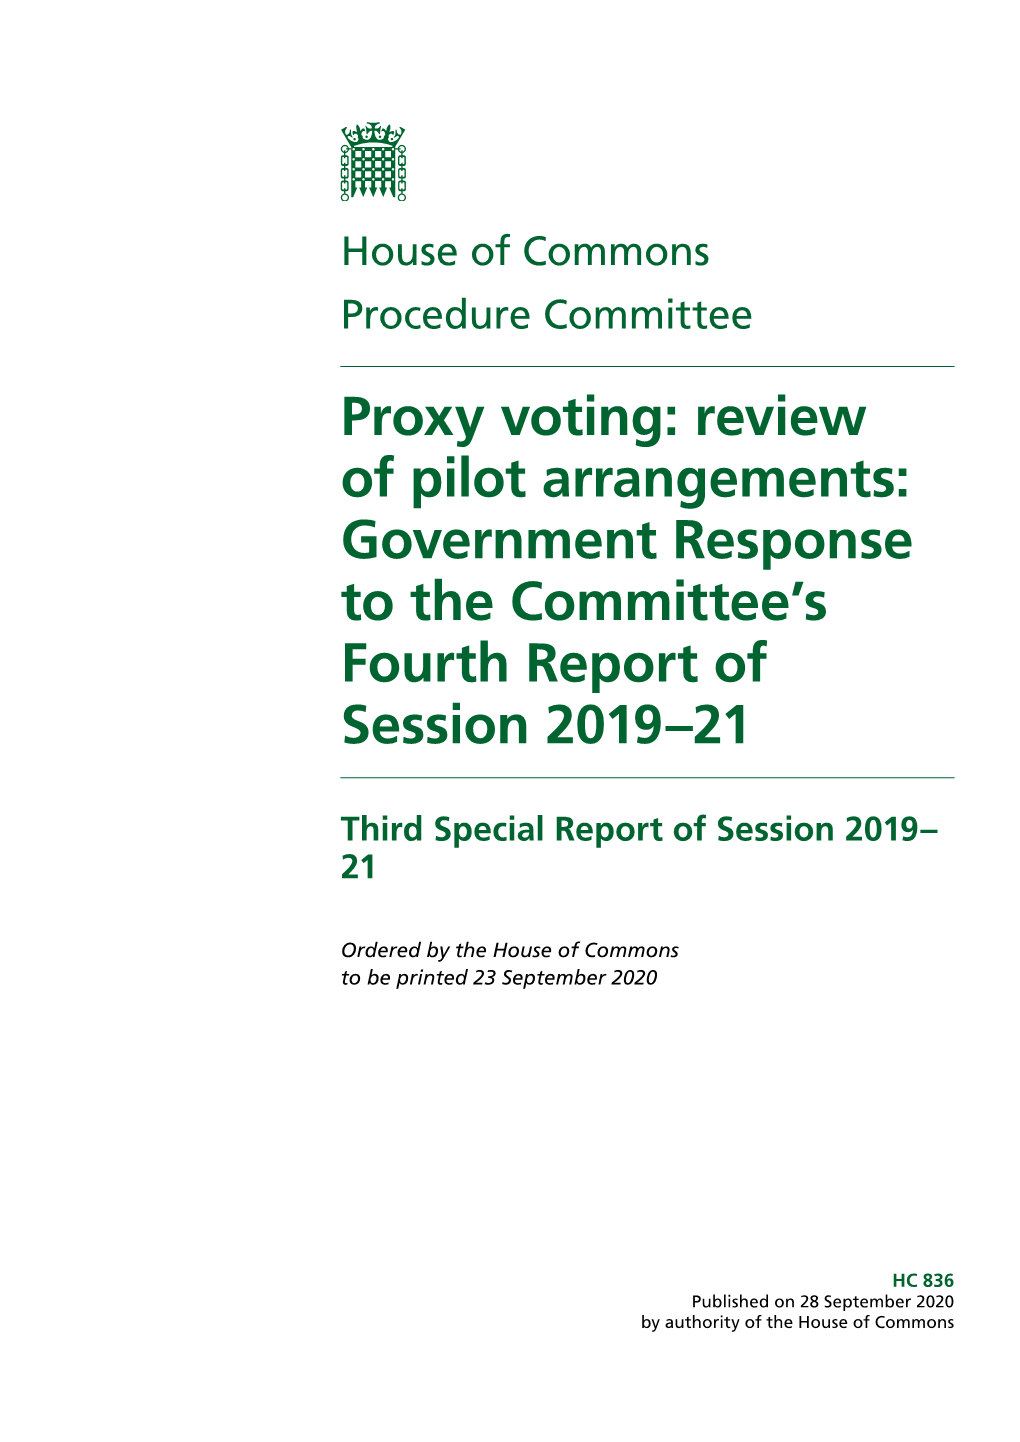 Proxy Voting: Review of Pilot Arrangements: Government Response to the Committee’S Fourth Report of Session 2019–21